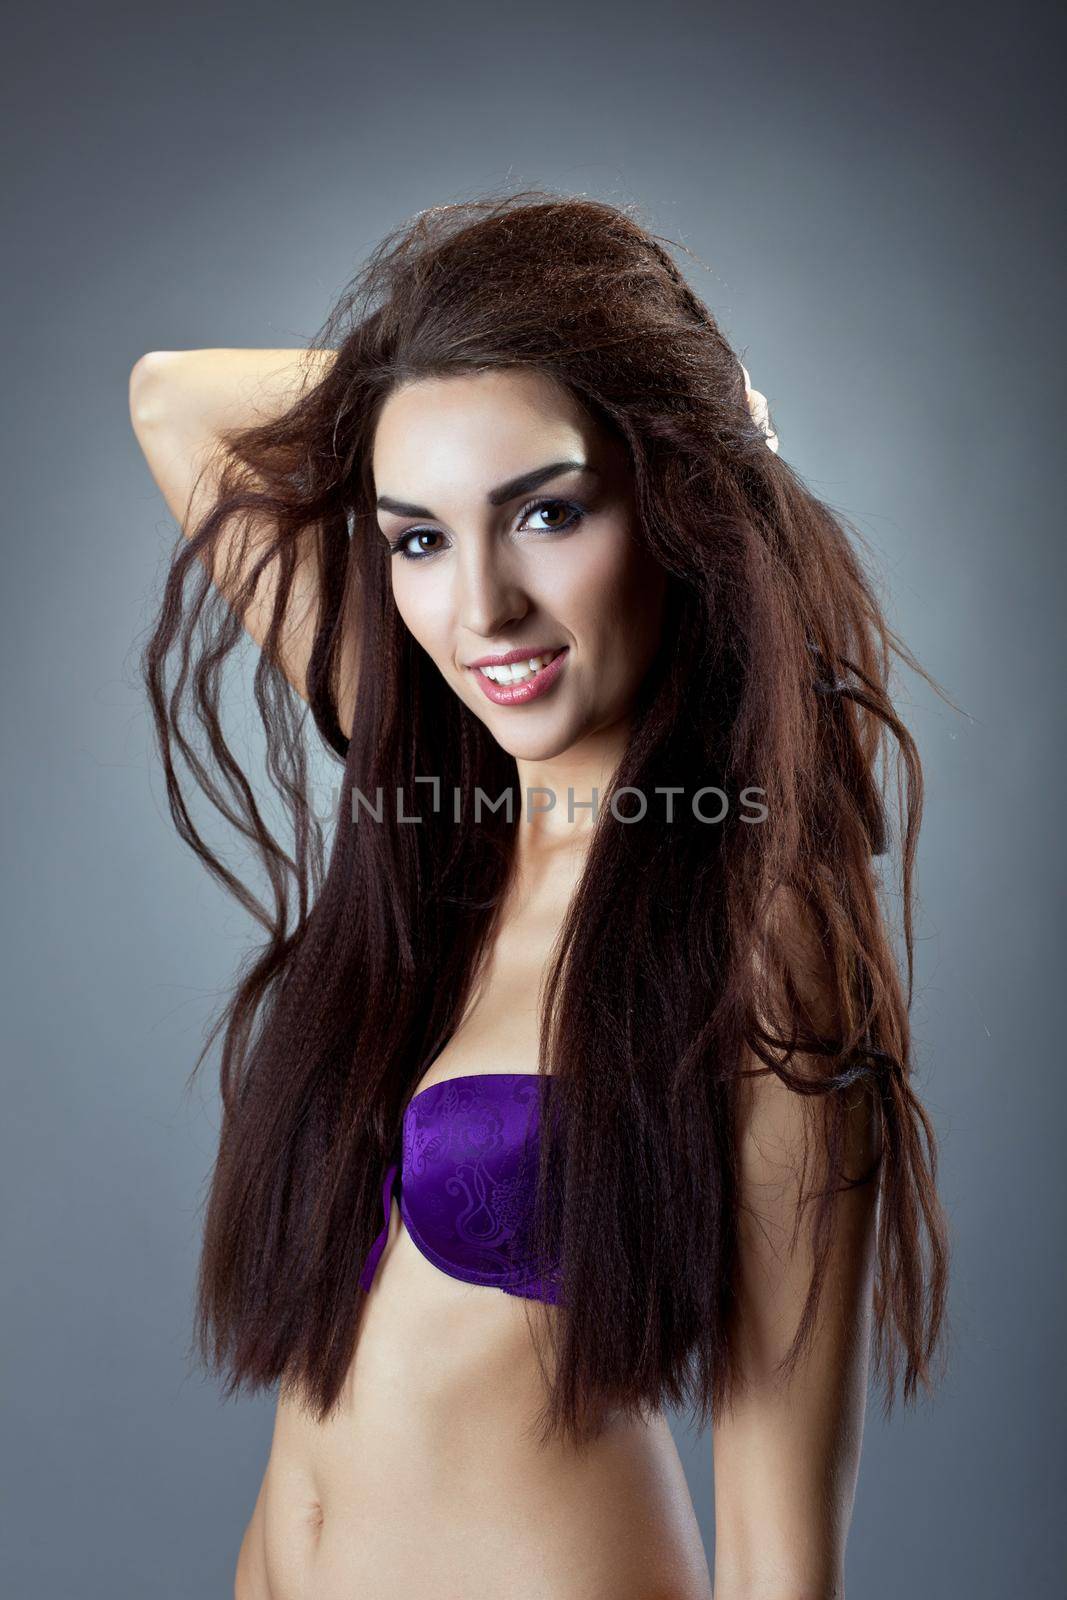 Sexy woman in purple bra portrait with hair style